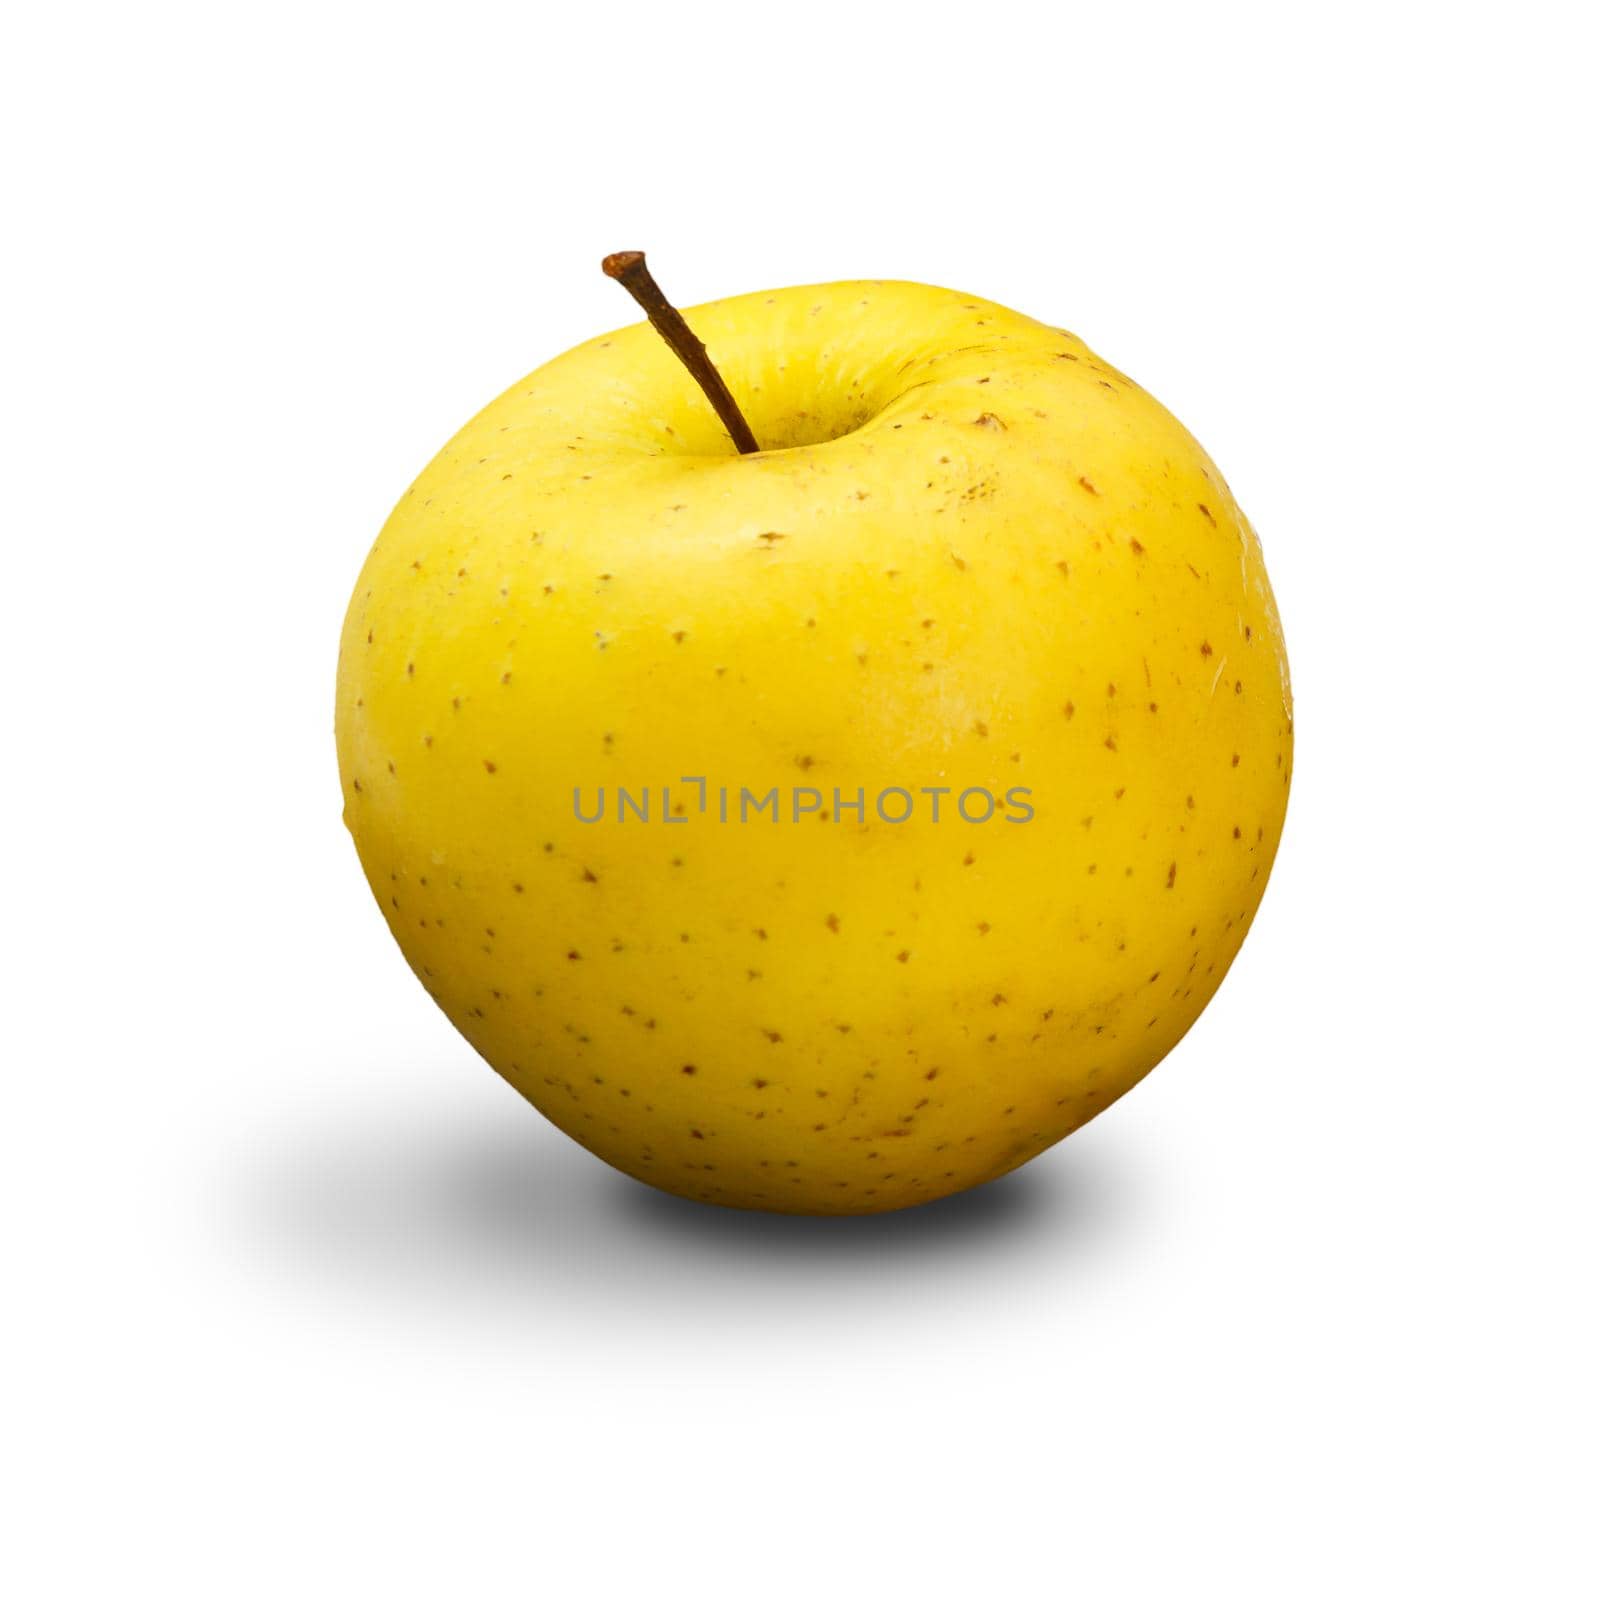 Mature yellow apple on the white isolated background. Organic fruits.